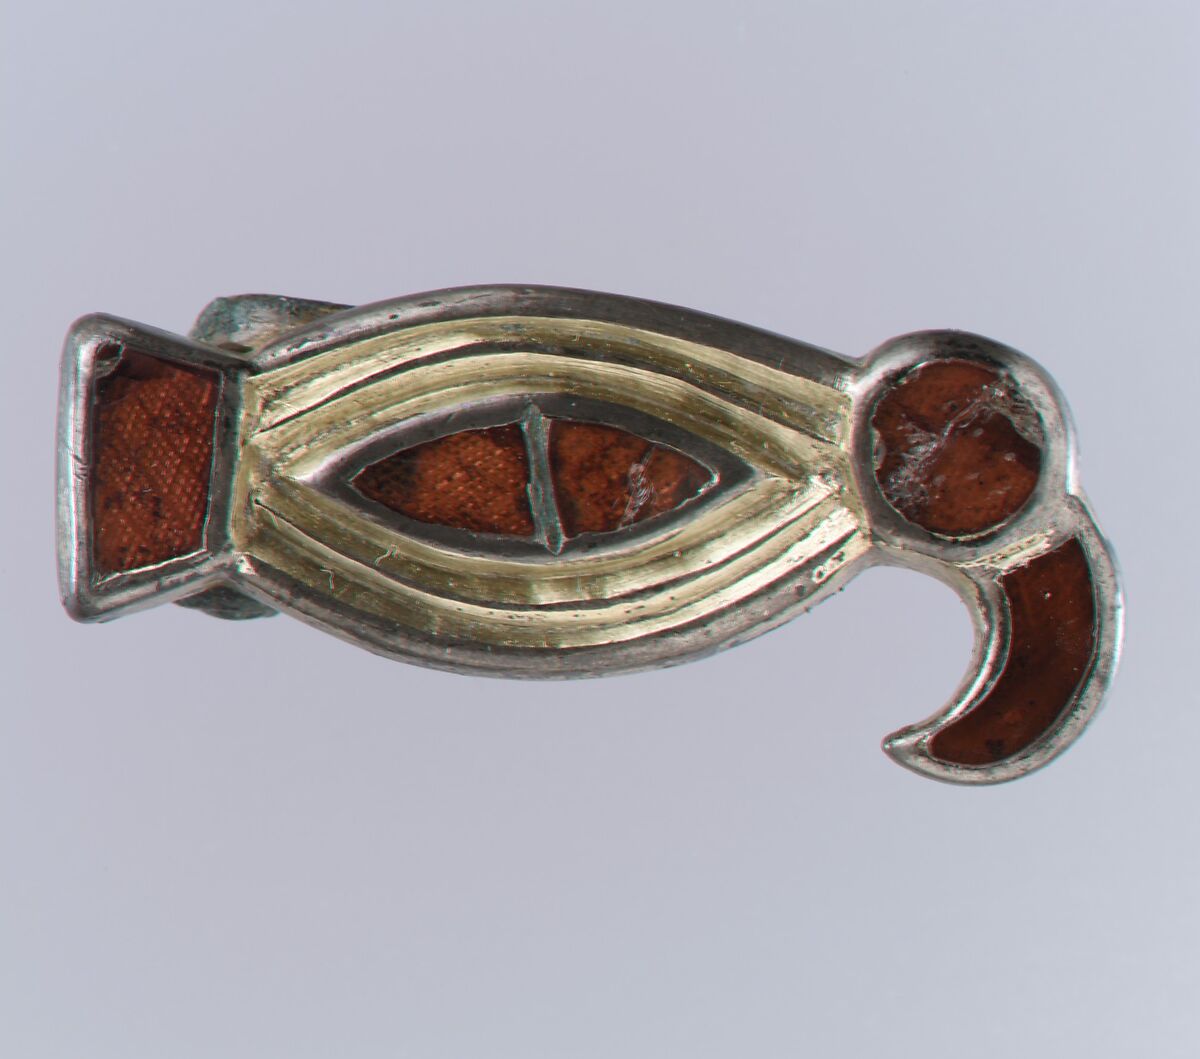 Bird-Shaped Brooch, Silver-gilt, garnets with patterned foil backings, Frankish 